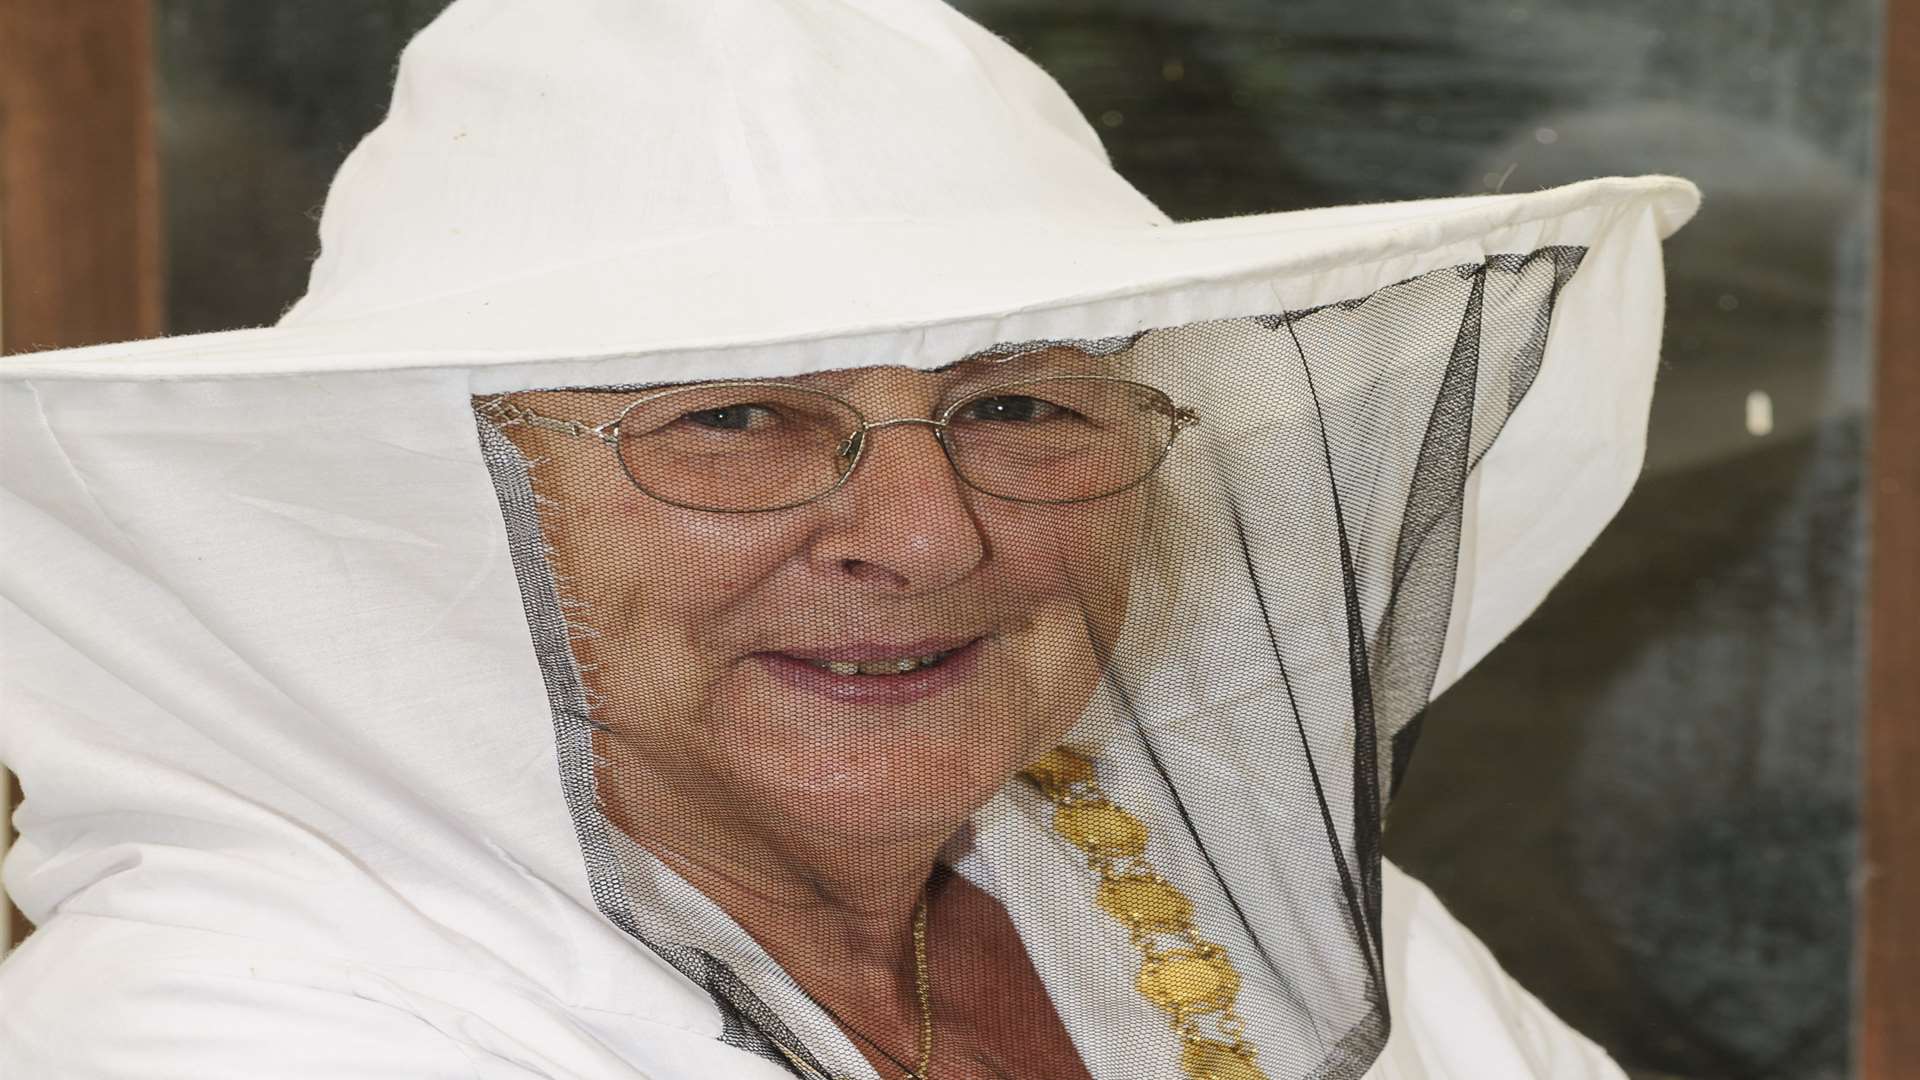 Councillor Rosanna Currans, deputy mayor of Dartford, in a beekeeper's outfit.